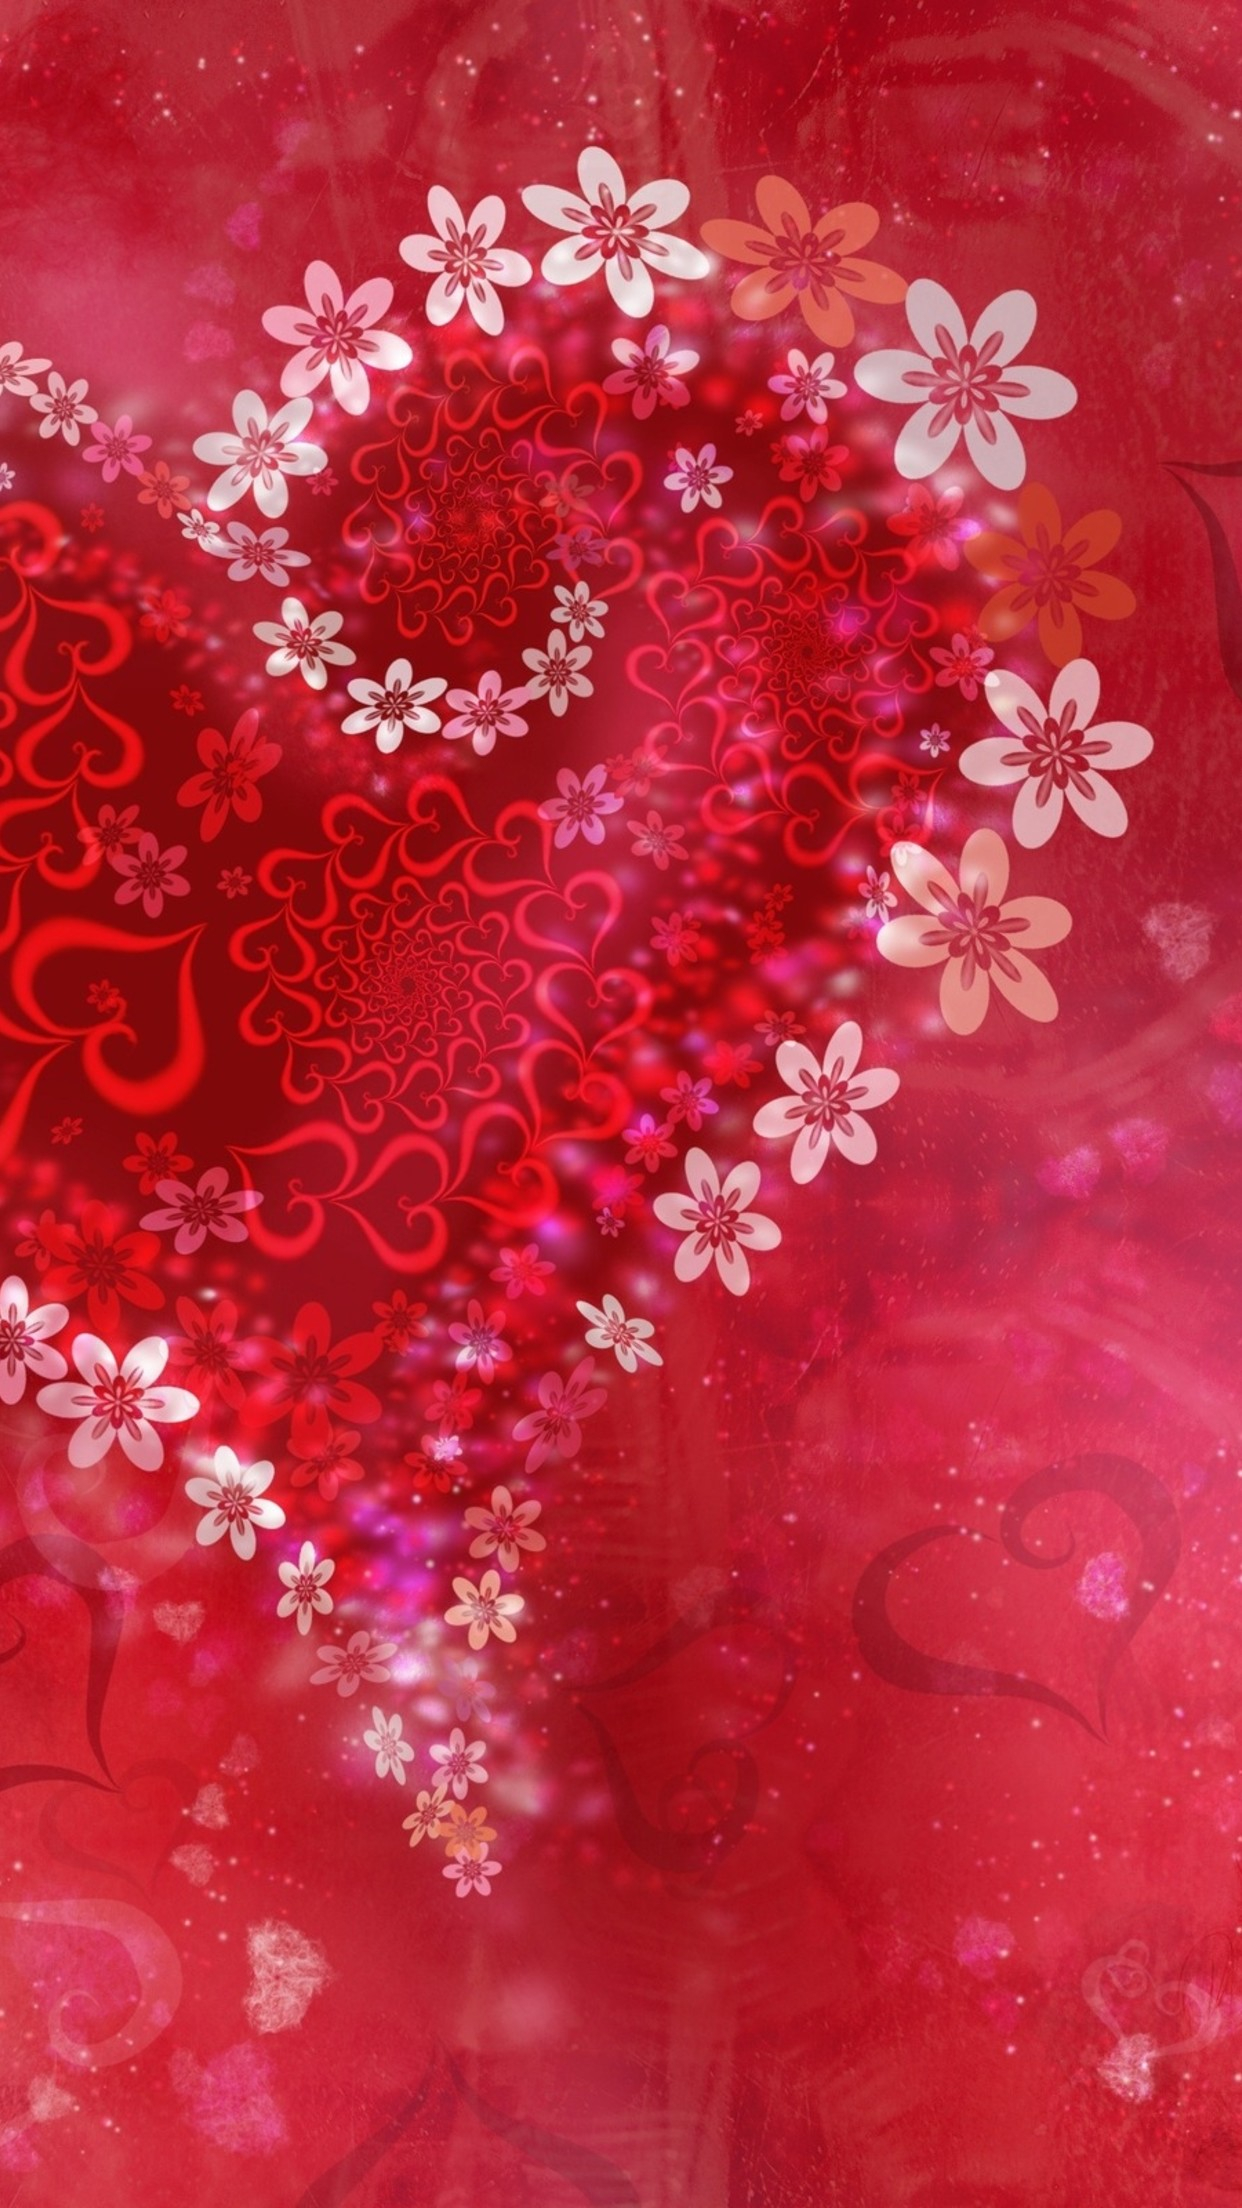 1242x2208 Valentine Day Flower Wallpaper for iPhone 11, Pro Max, X, 8, 7, 6 Free Download on 3Wallpapers